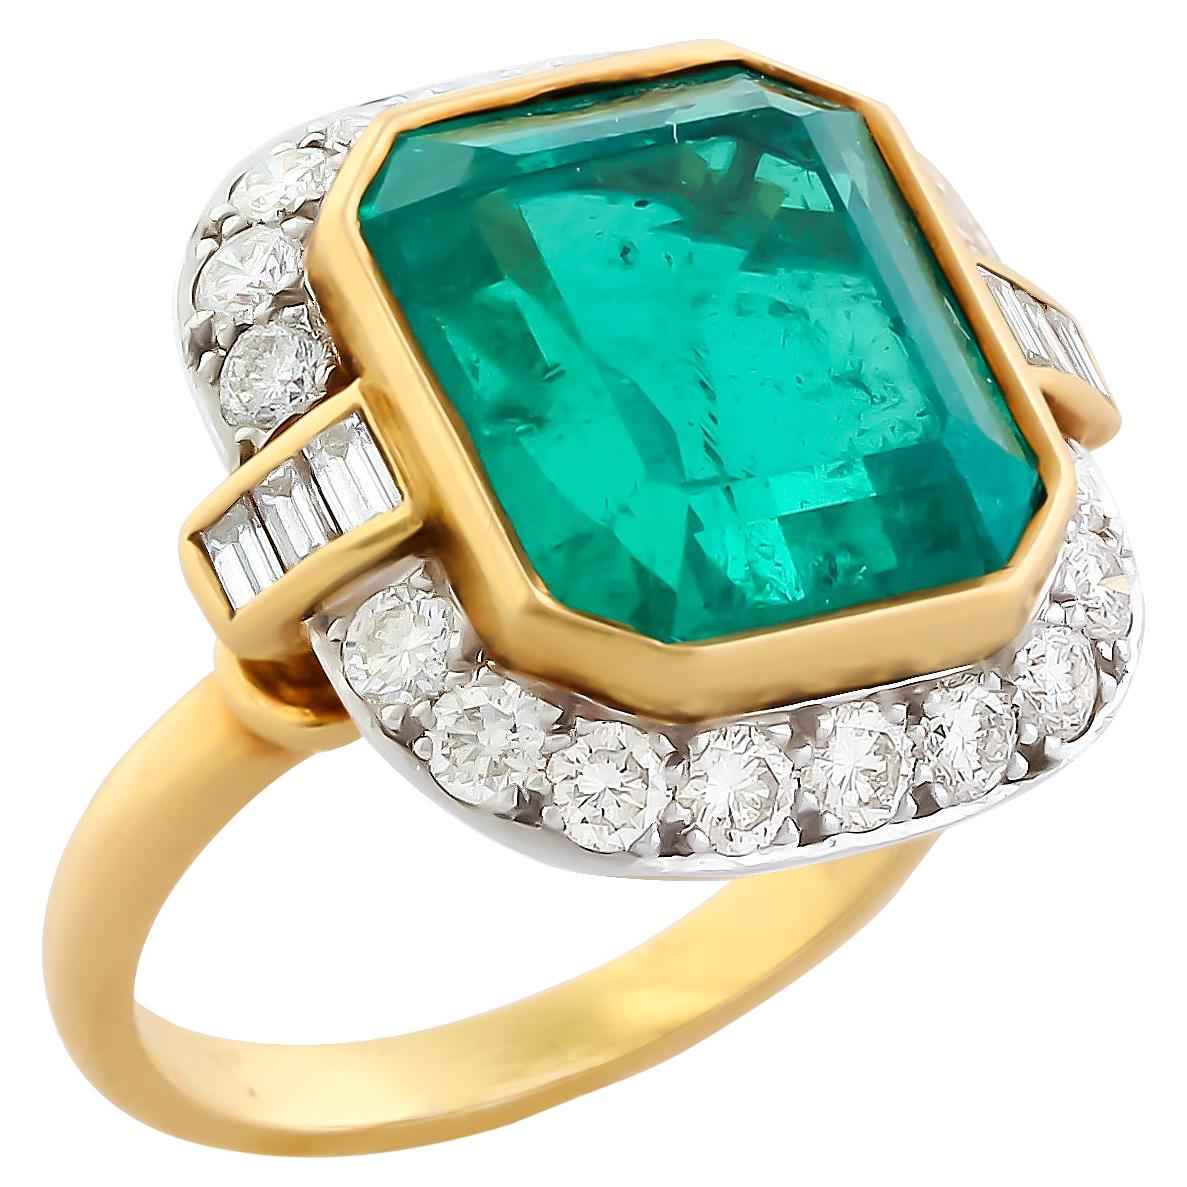 7.20 Carat Colombian Emerald Ring For Sale